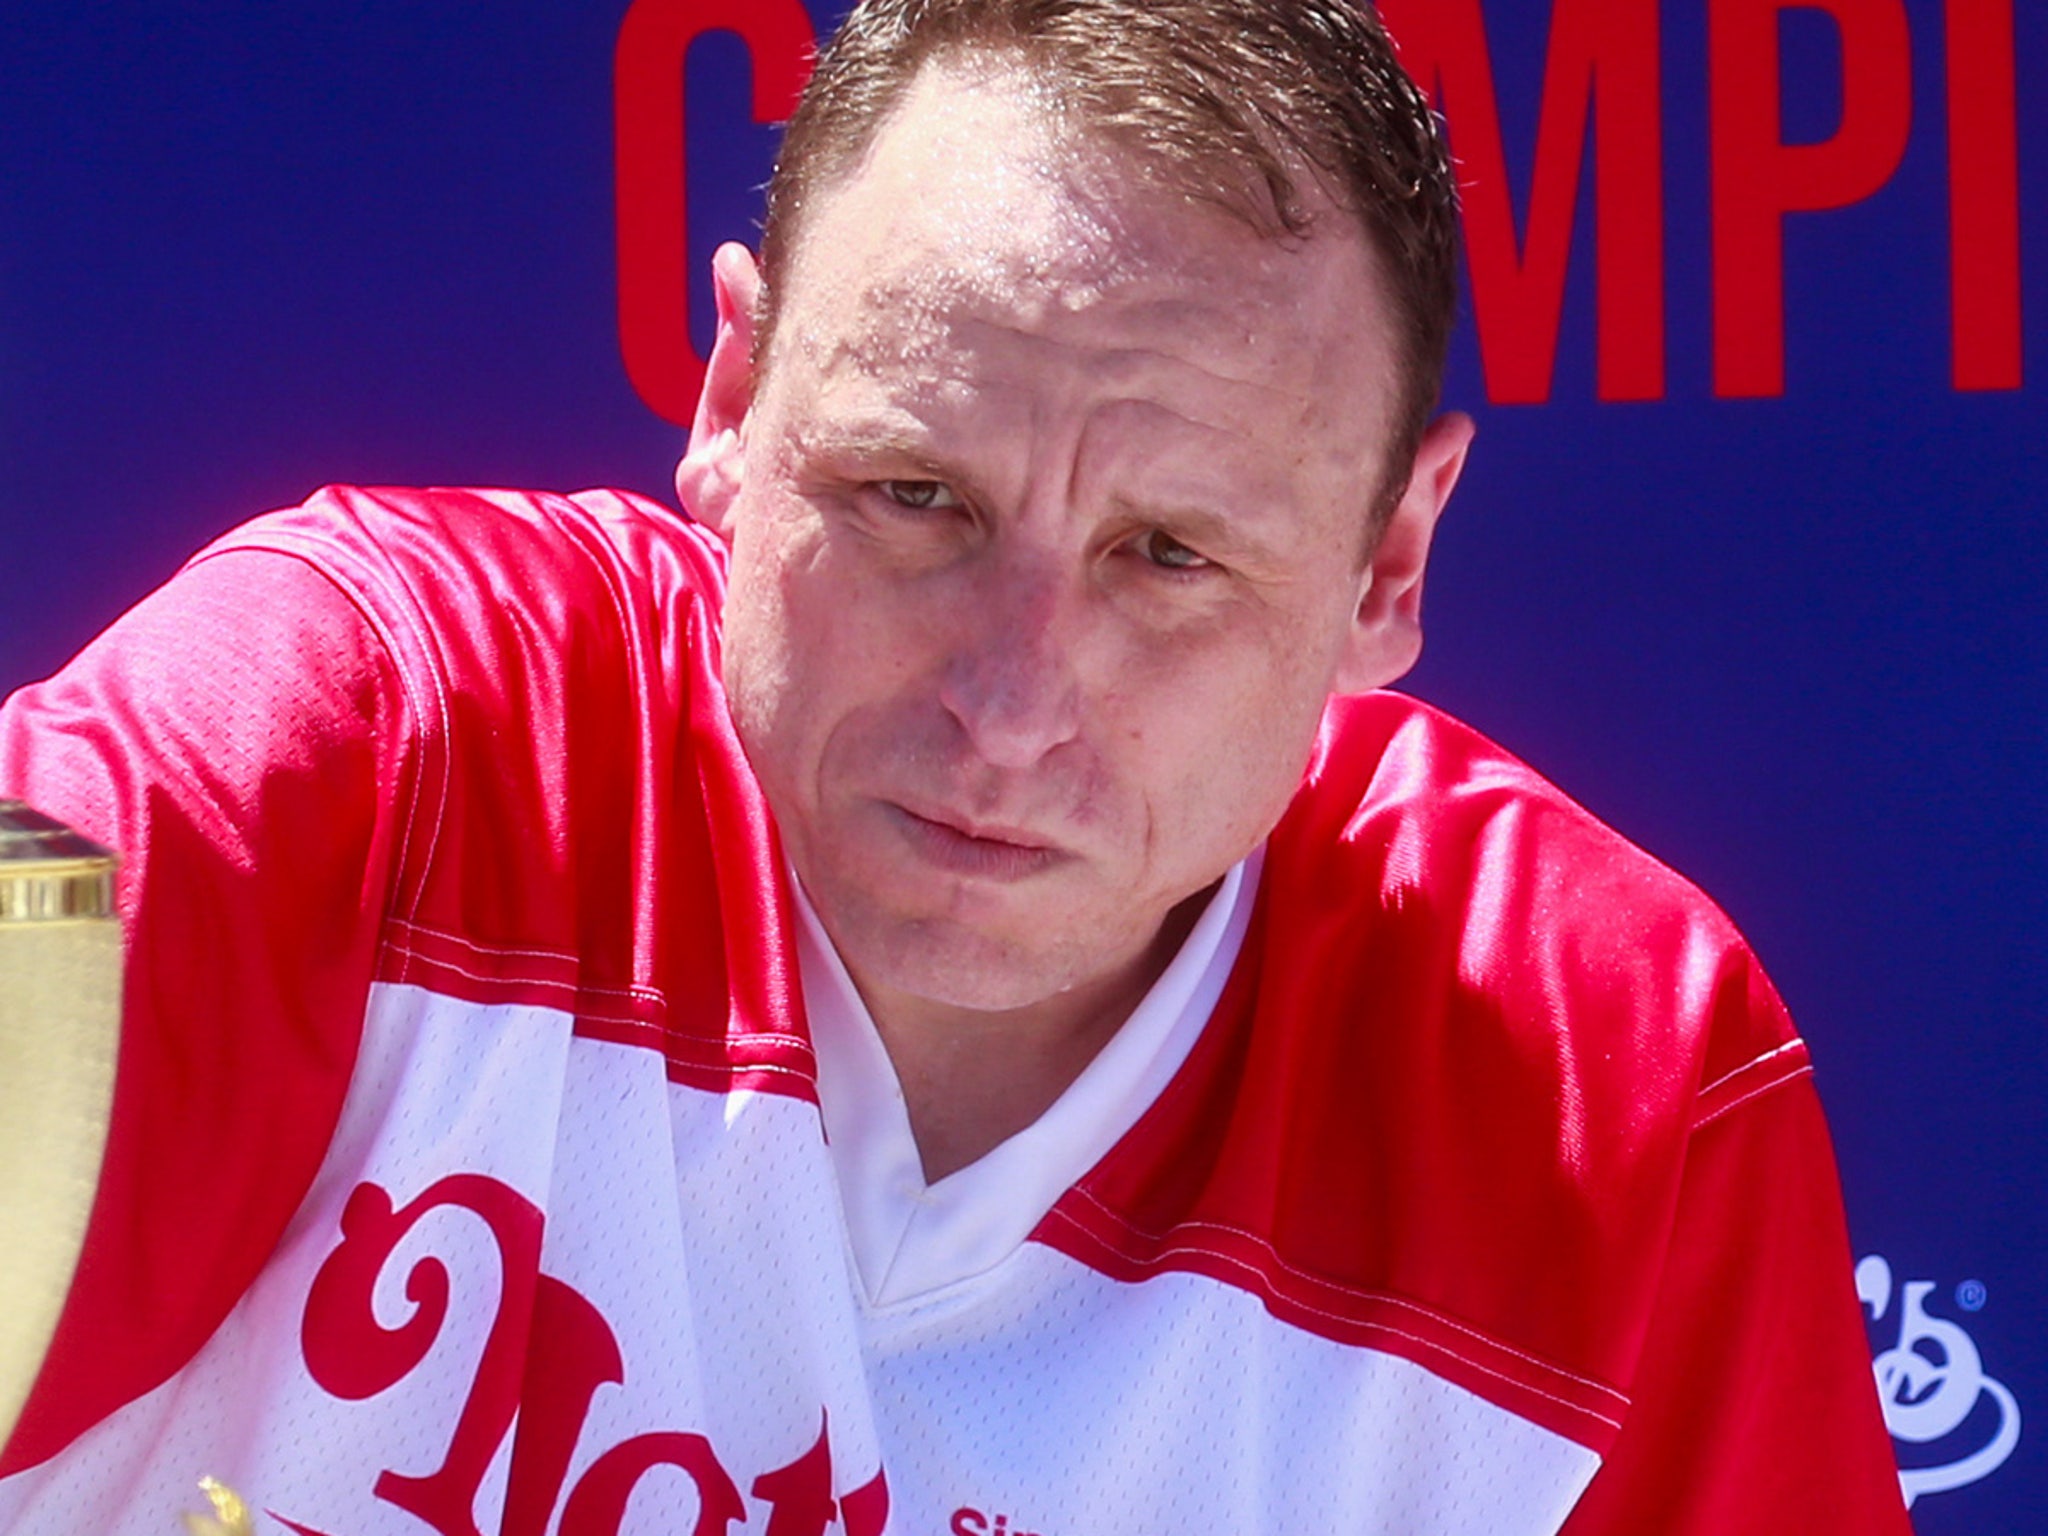 Joey Chestnut Scrapped From Nathan's Hot Dog Contest